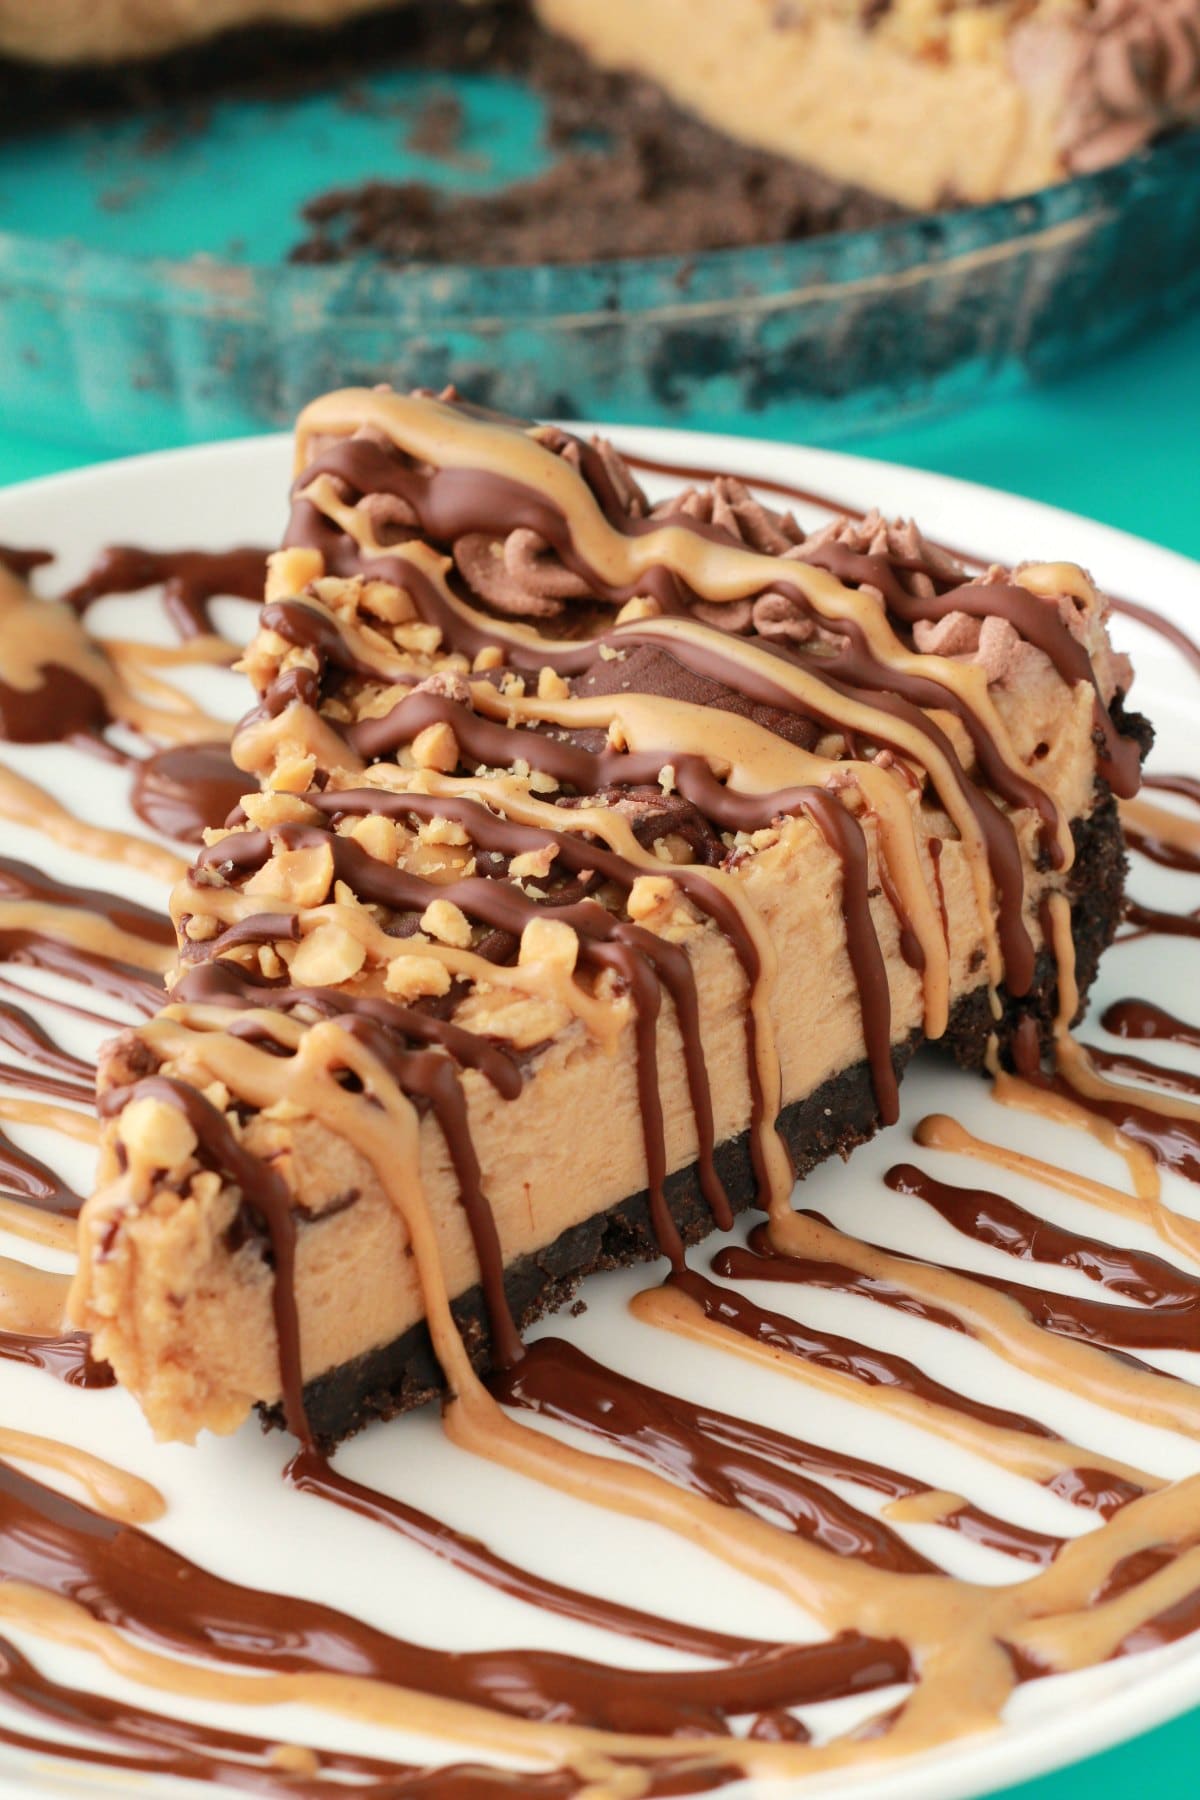 Vegan peanut butter pie is sweet, creamy, and deliciously rich. Topped with chocolate and peanut butter drizzle and peanut crumble